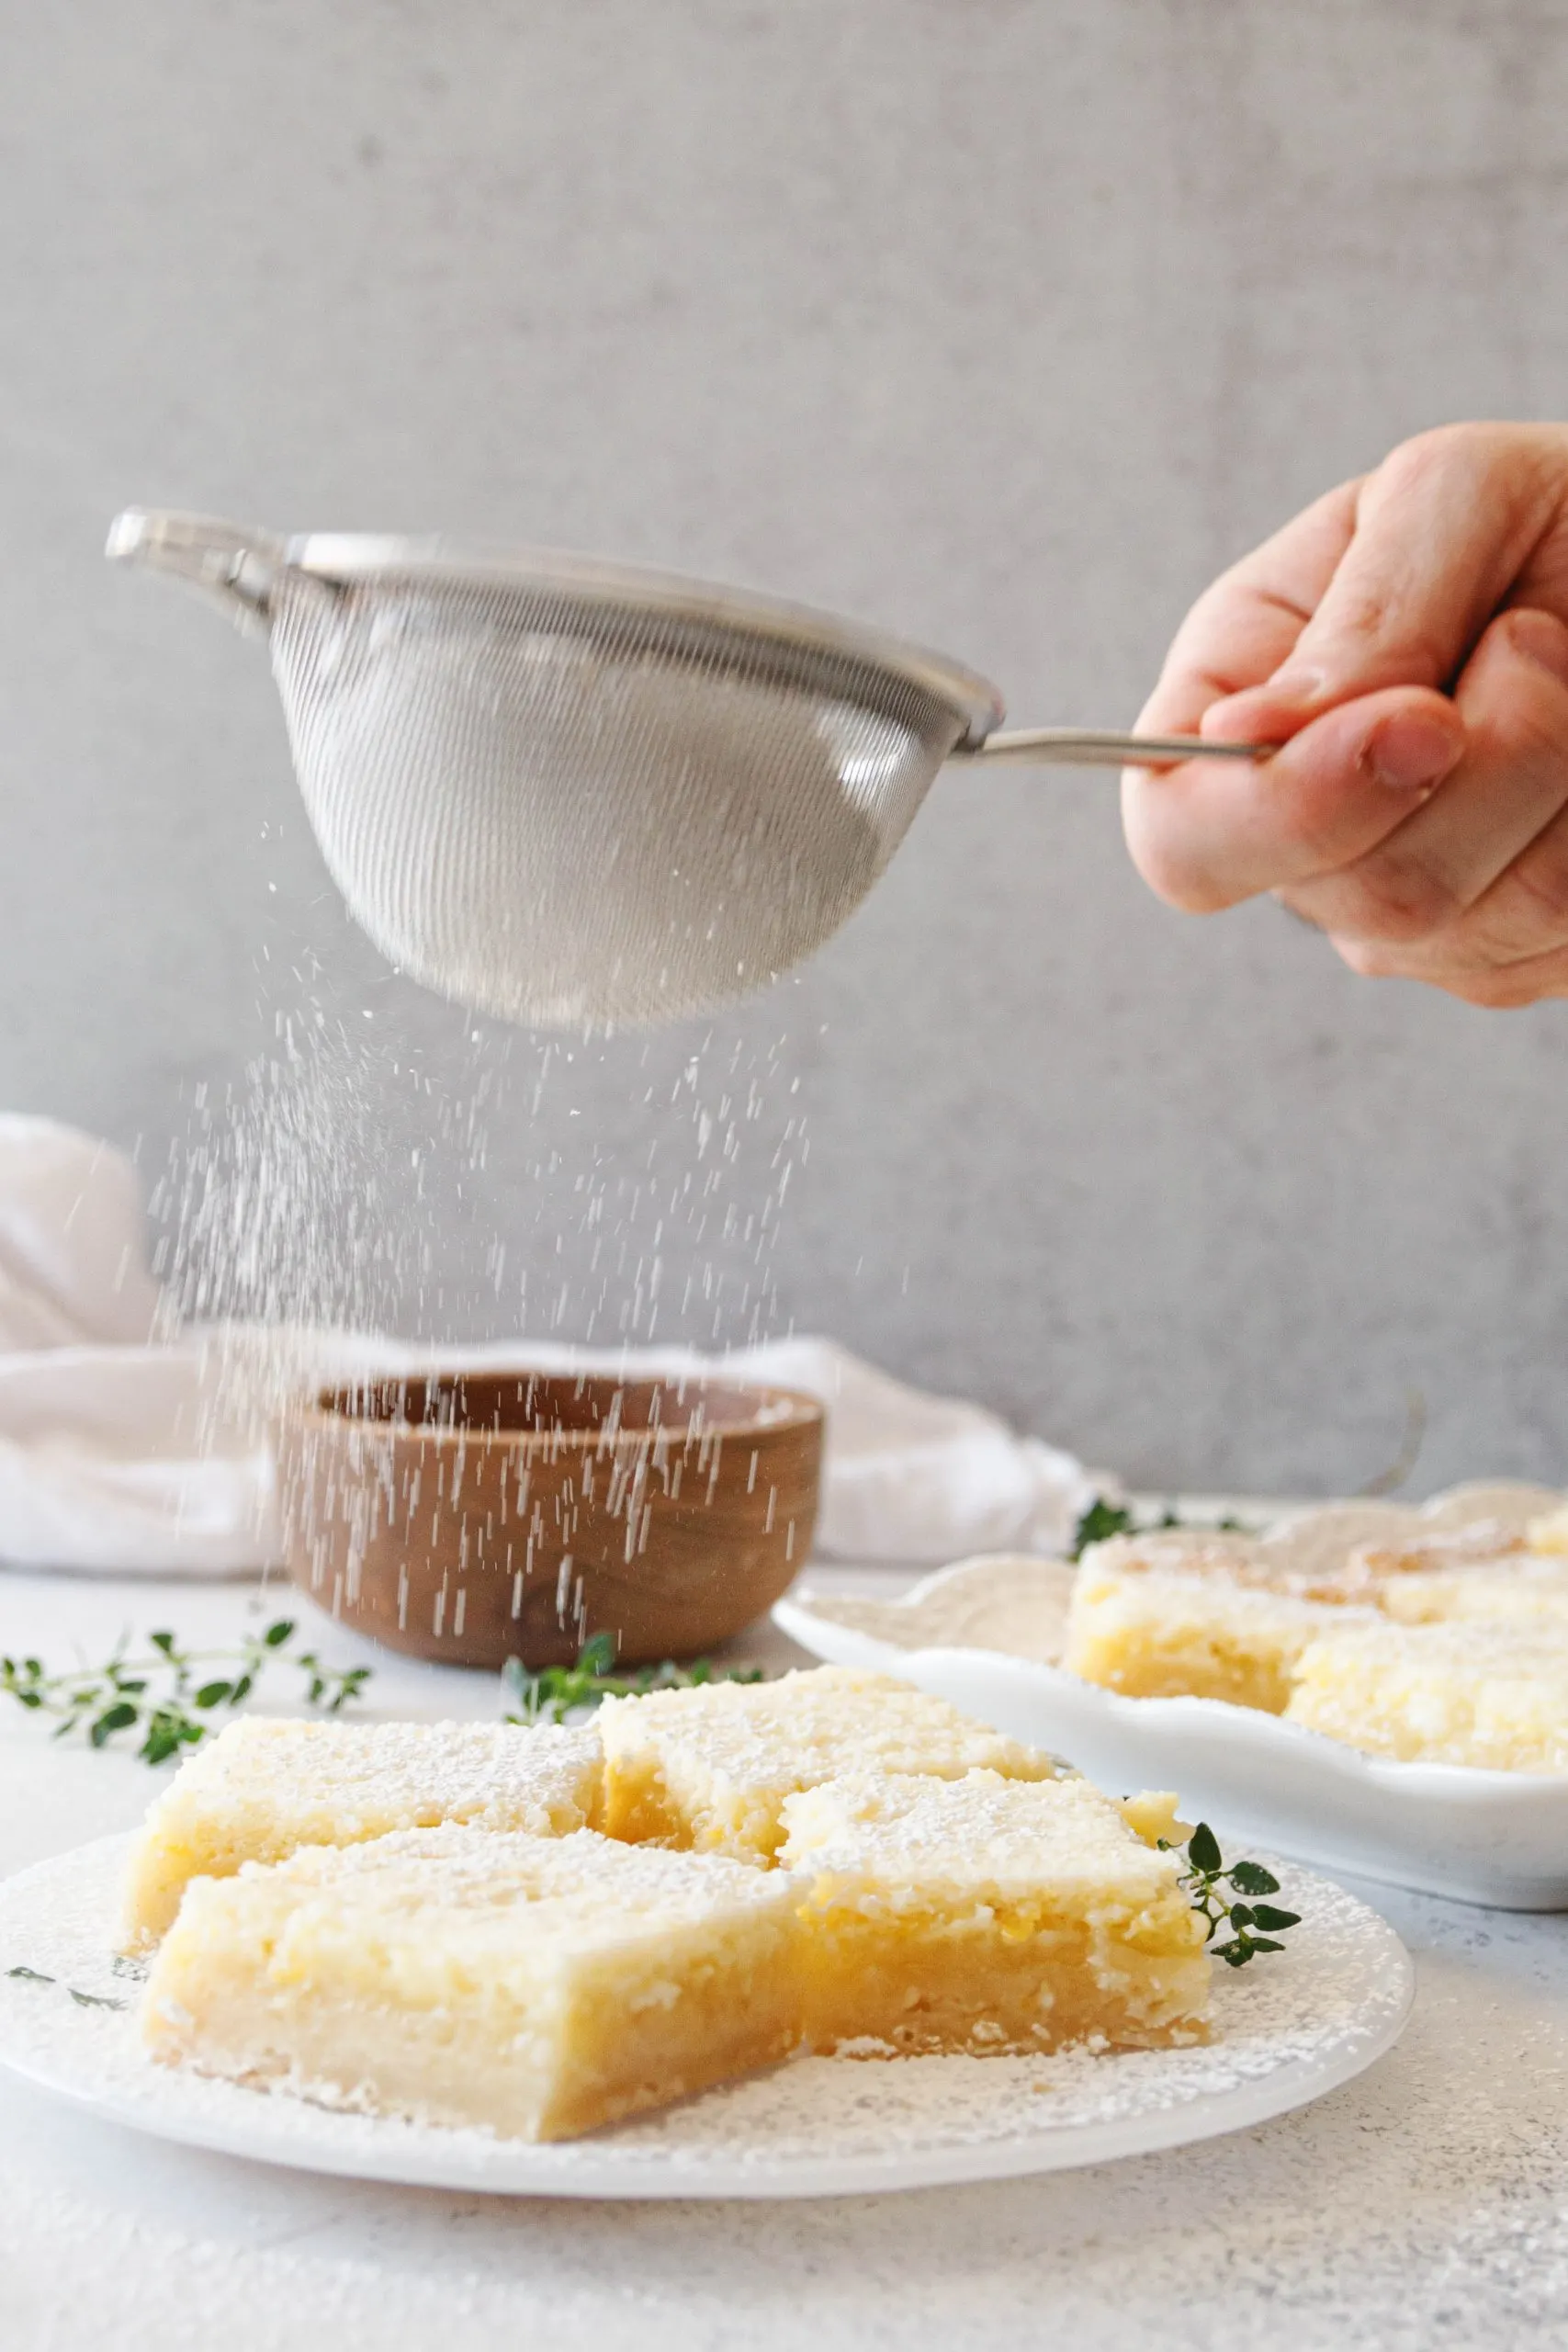 The Godfather's hand shaking a fine mesh sieve with powdered sugar over a plate of lime bars